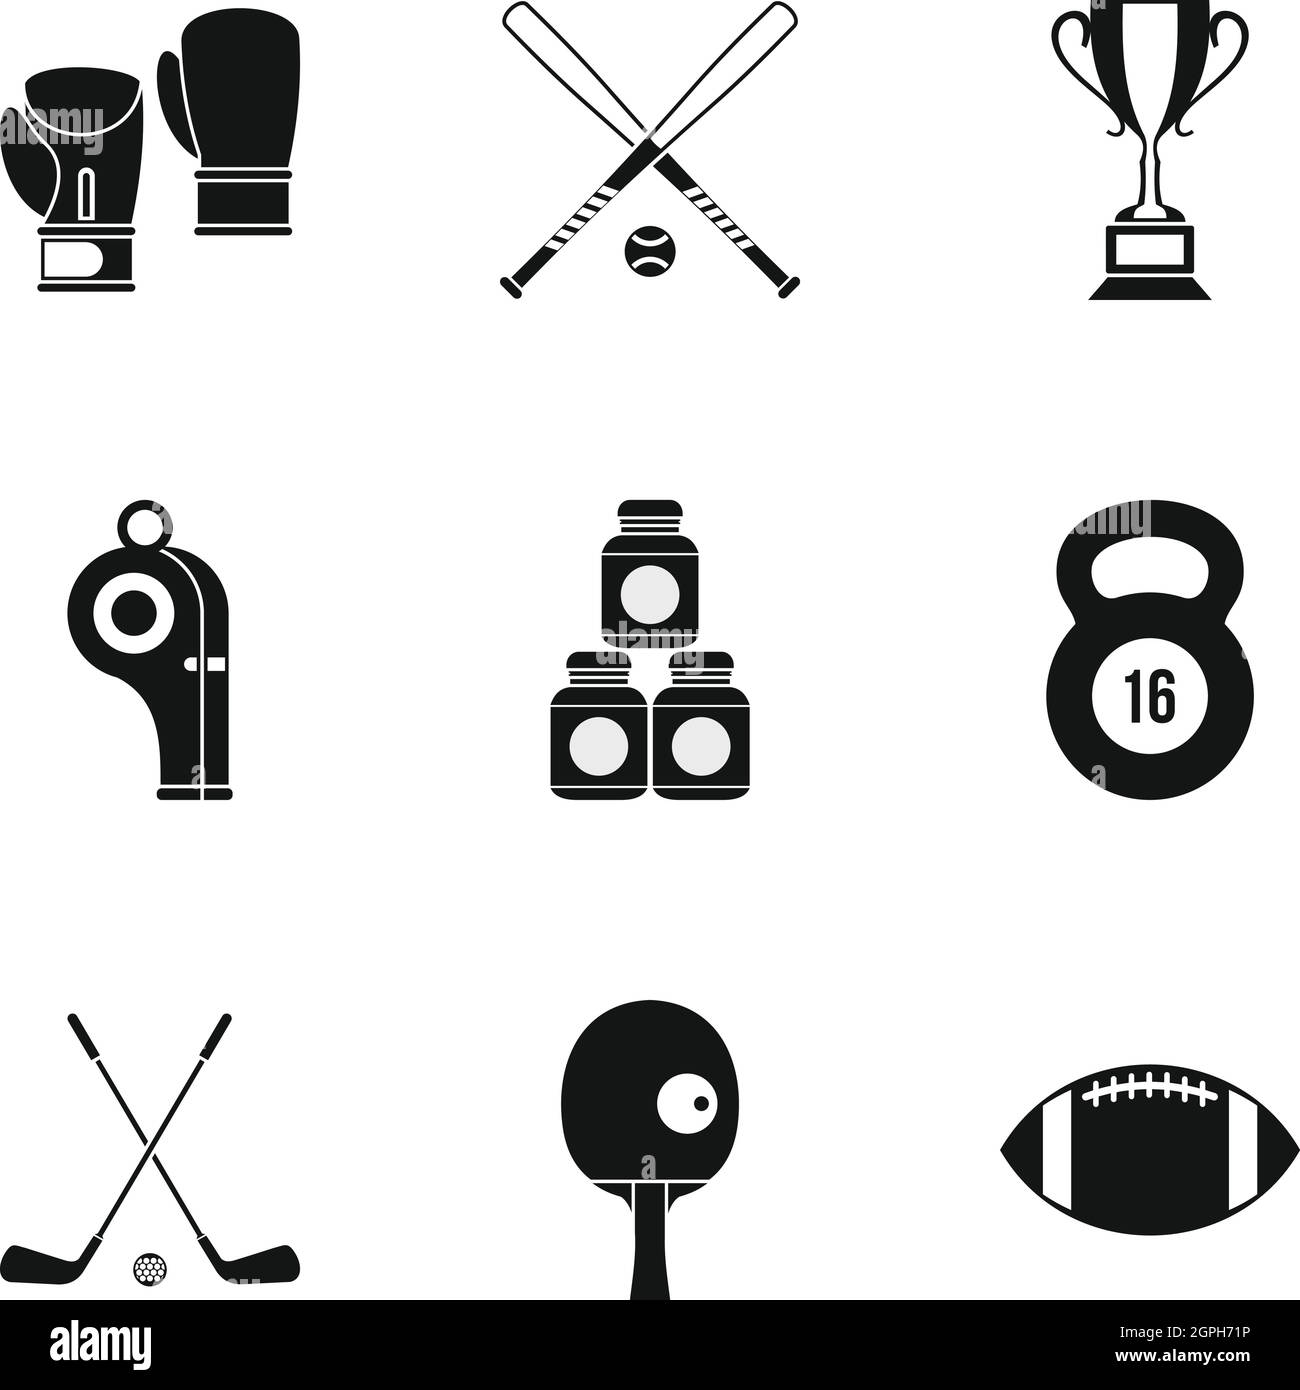 Sports stuff icons set, simple style Stock Vector